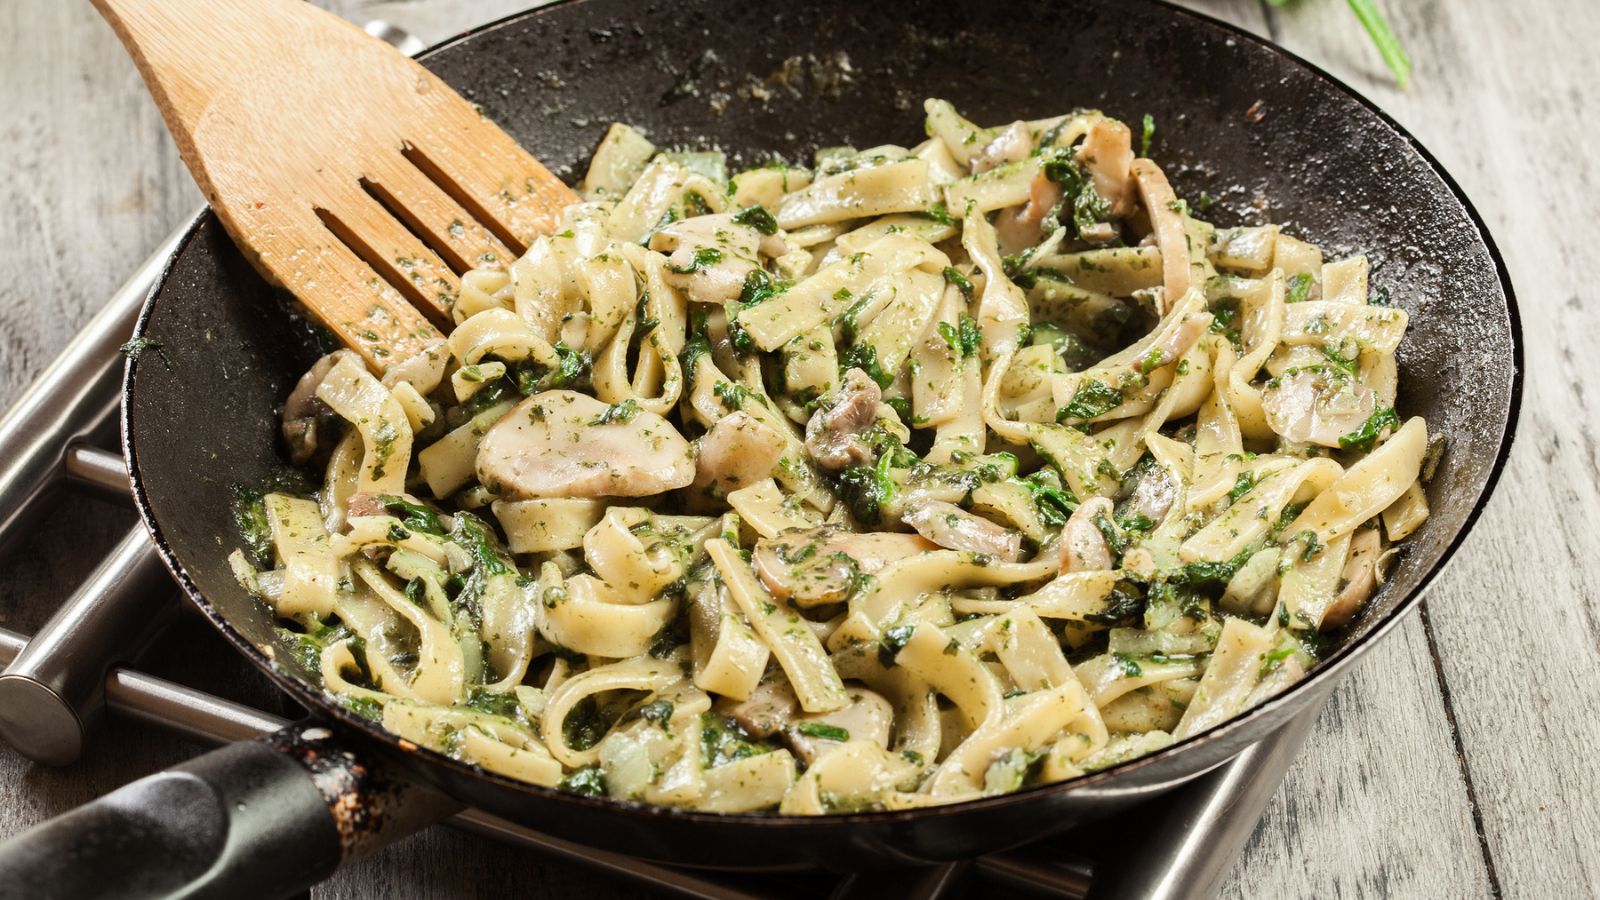 20 Irresistible Pasta Dinners That’ll Make You Fall In Love Again